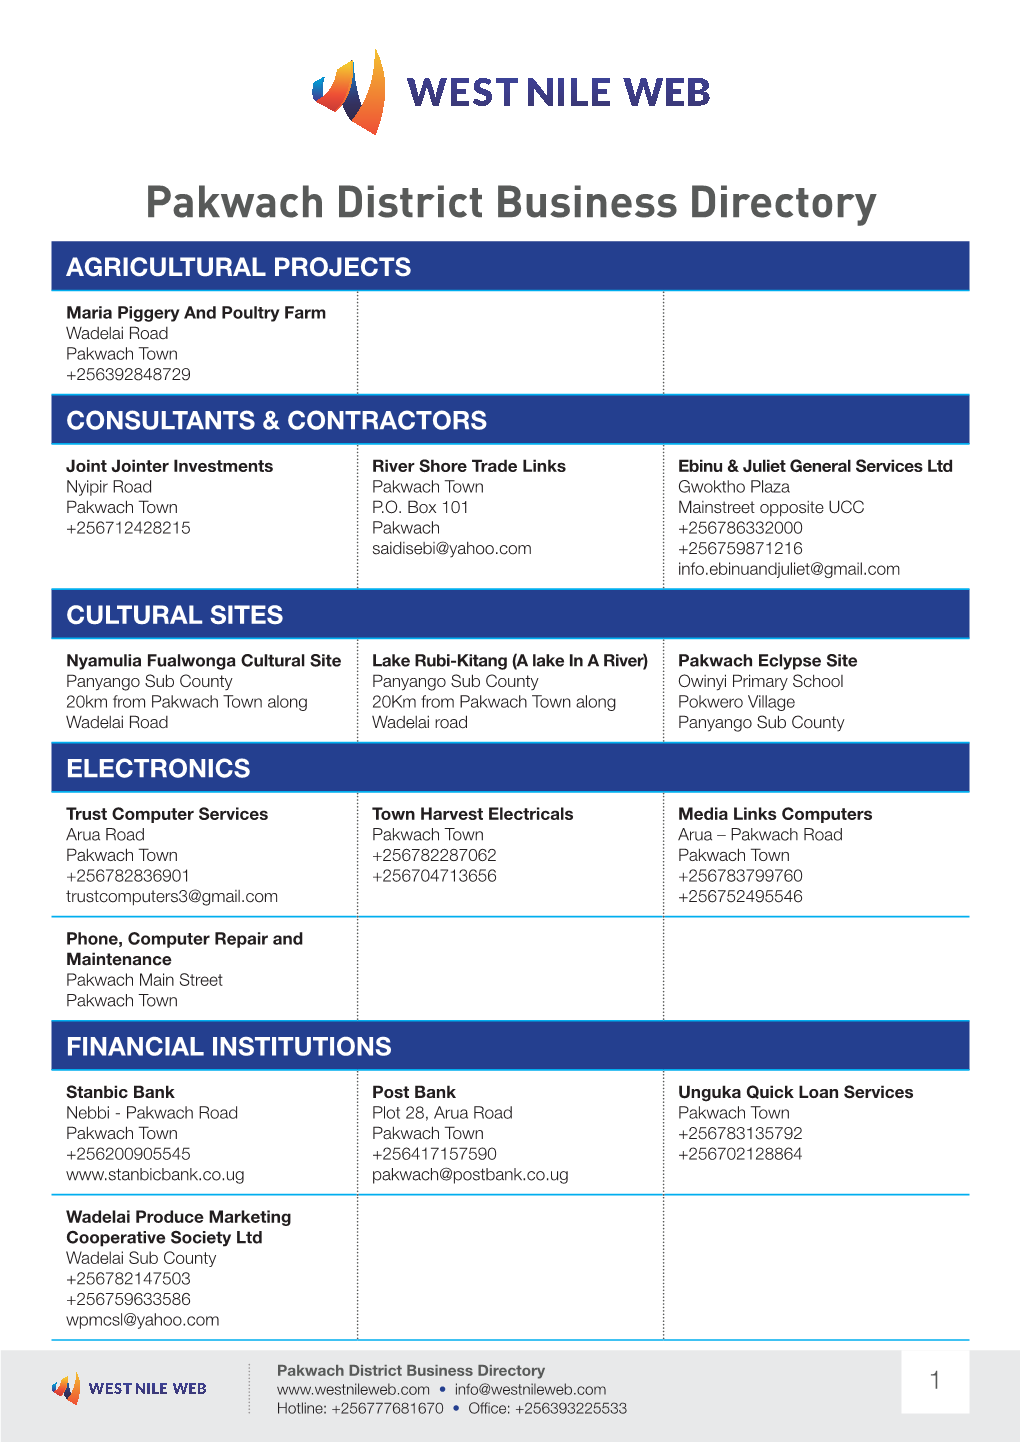 Pakwach District Business Directory.Indd